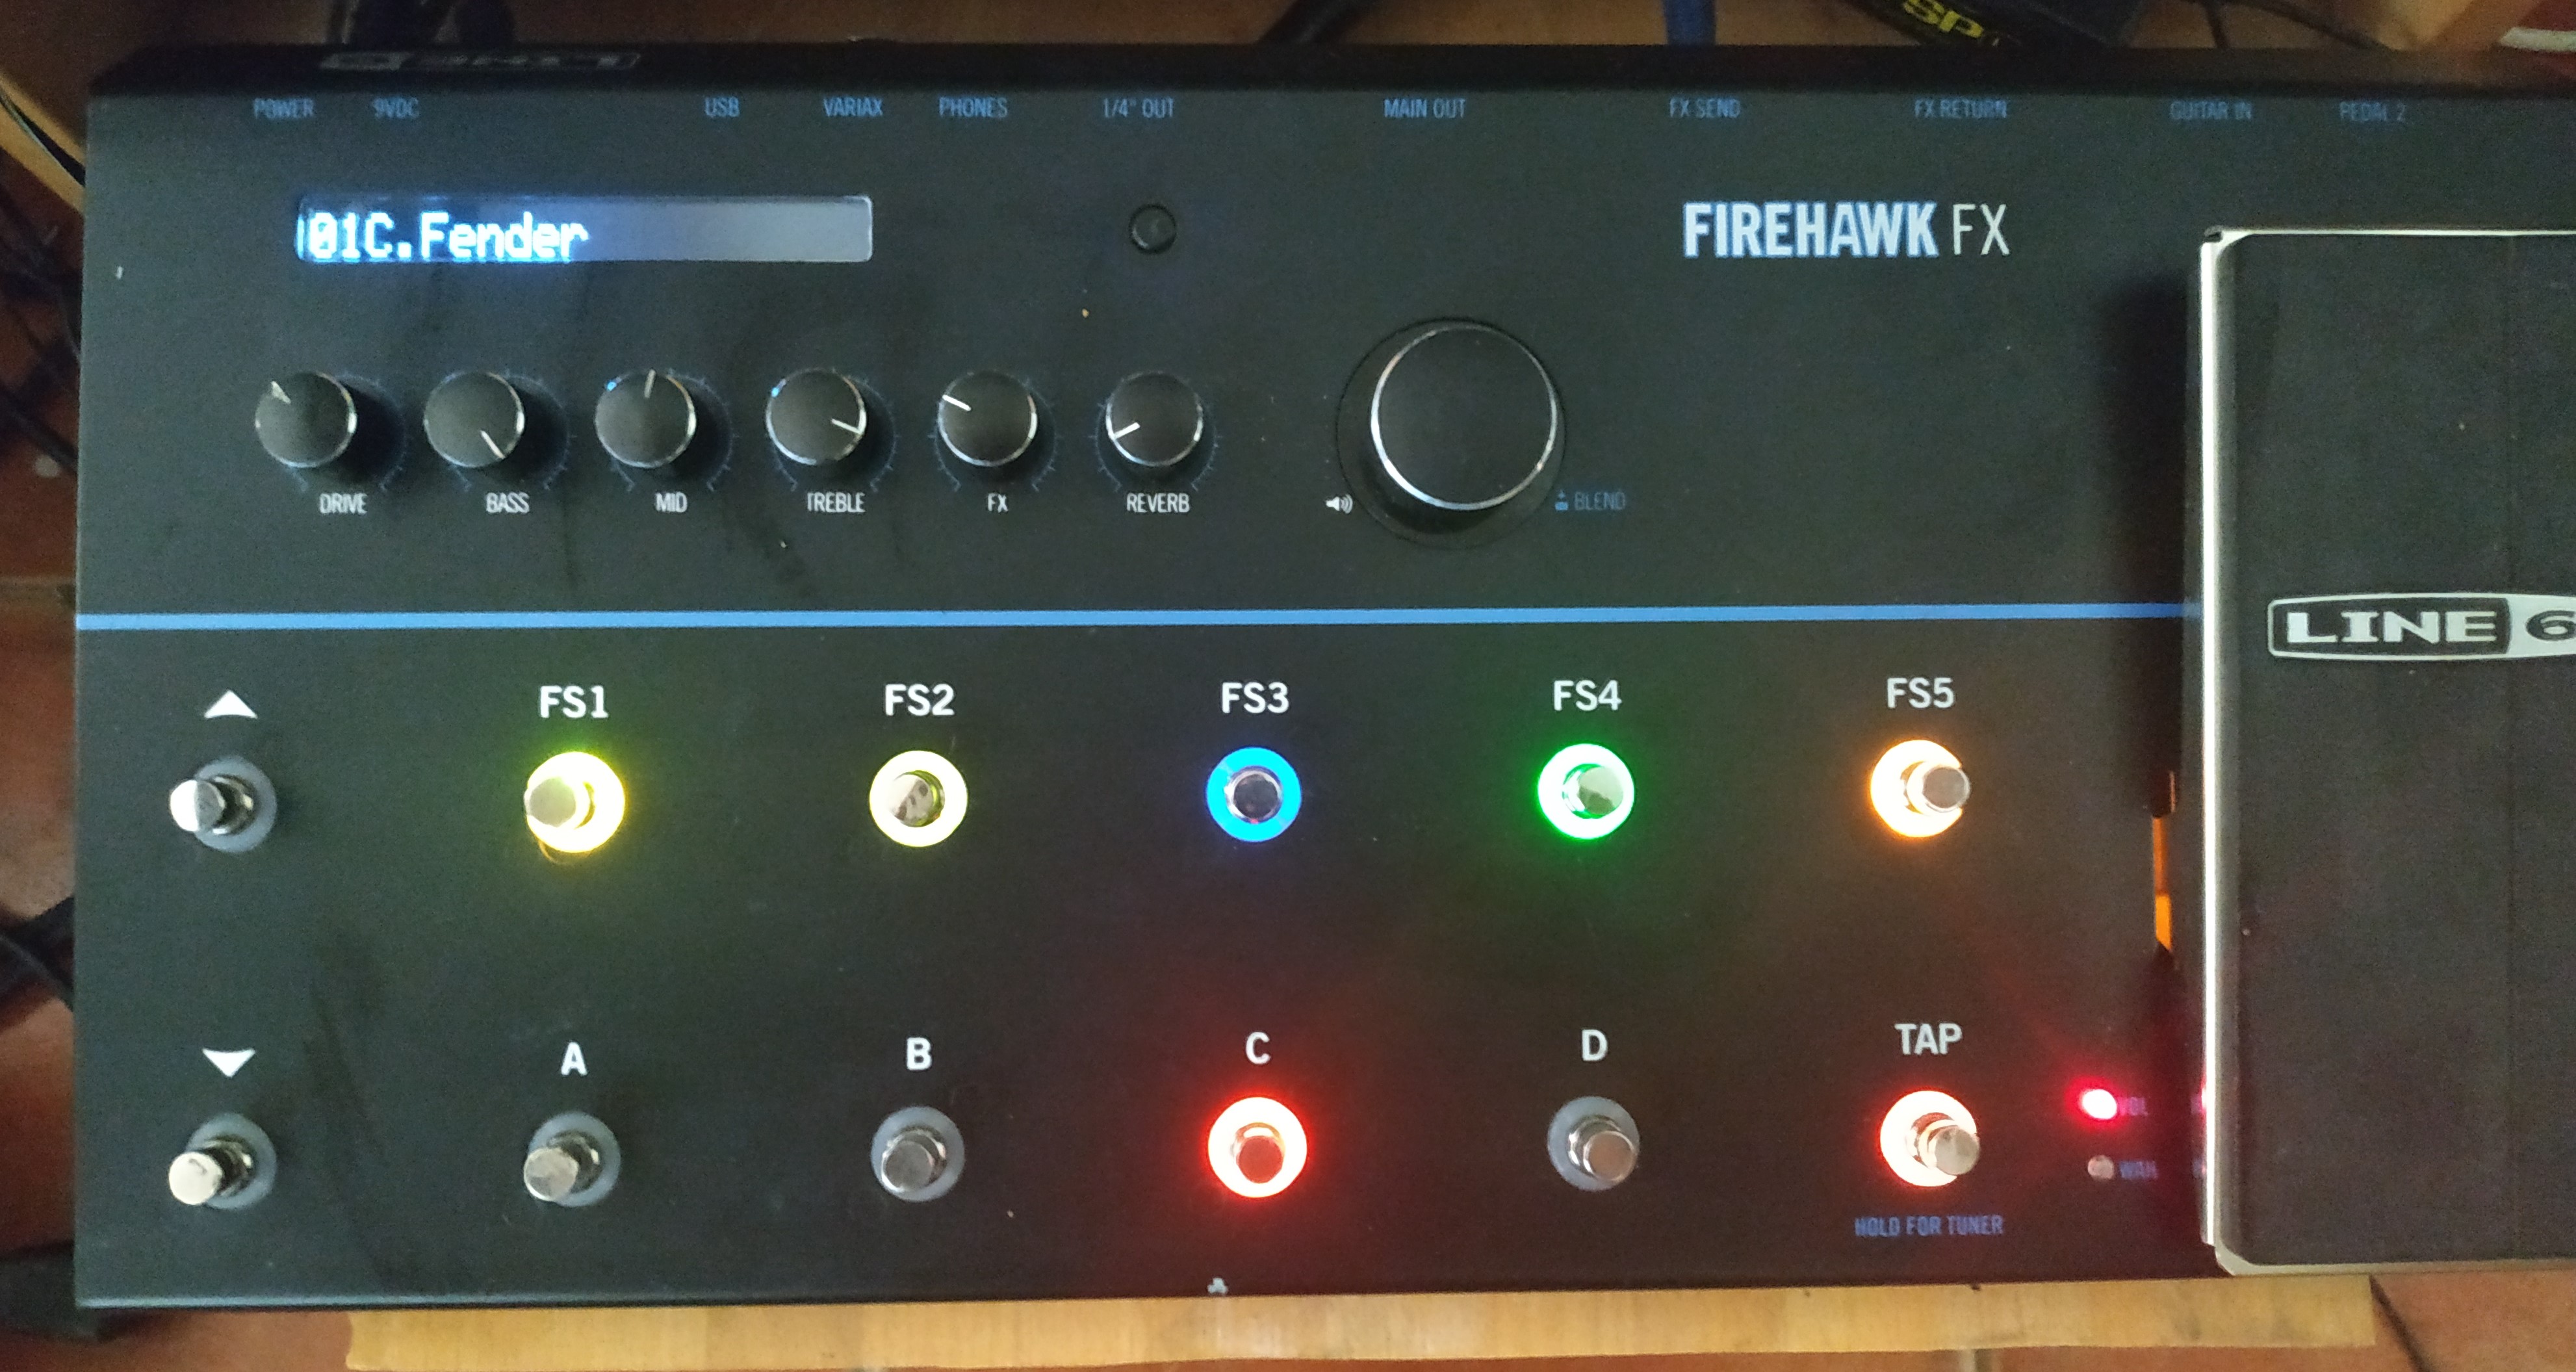 Line 6 Firehawk FX multi-effect pedal introduced at NAMM